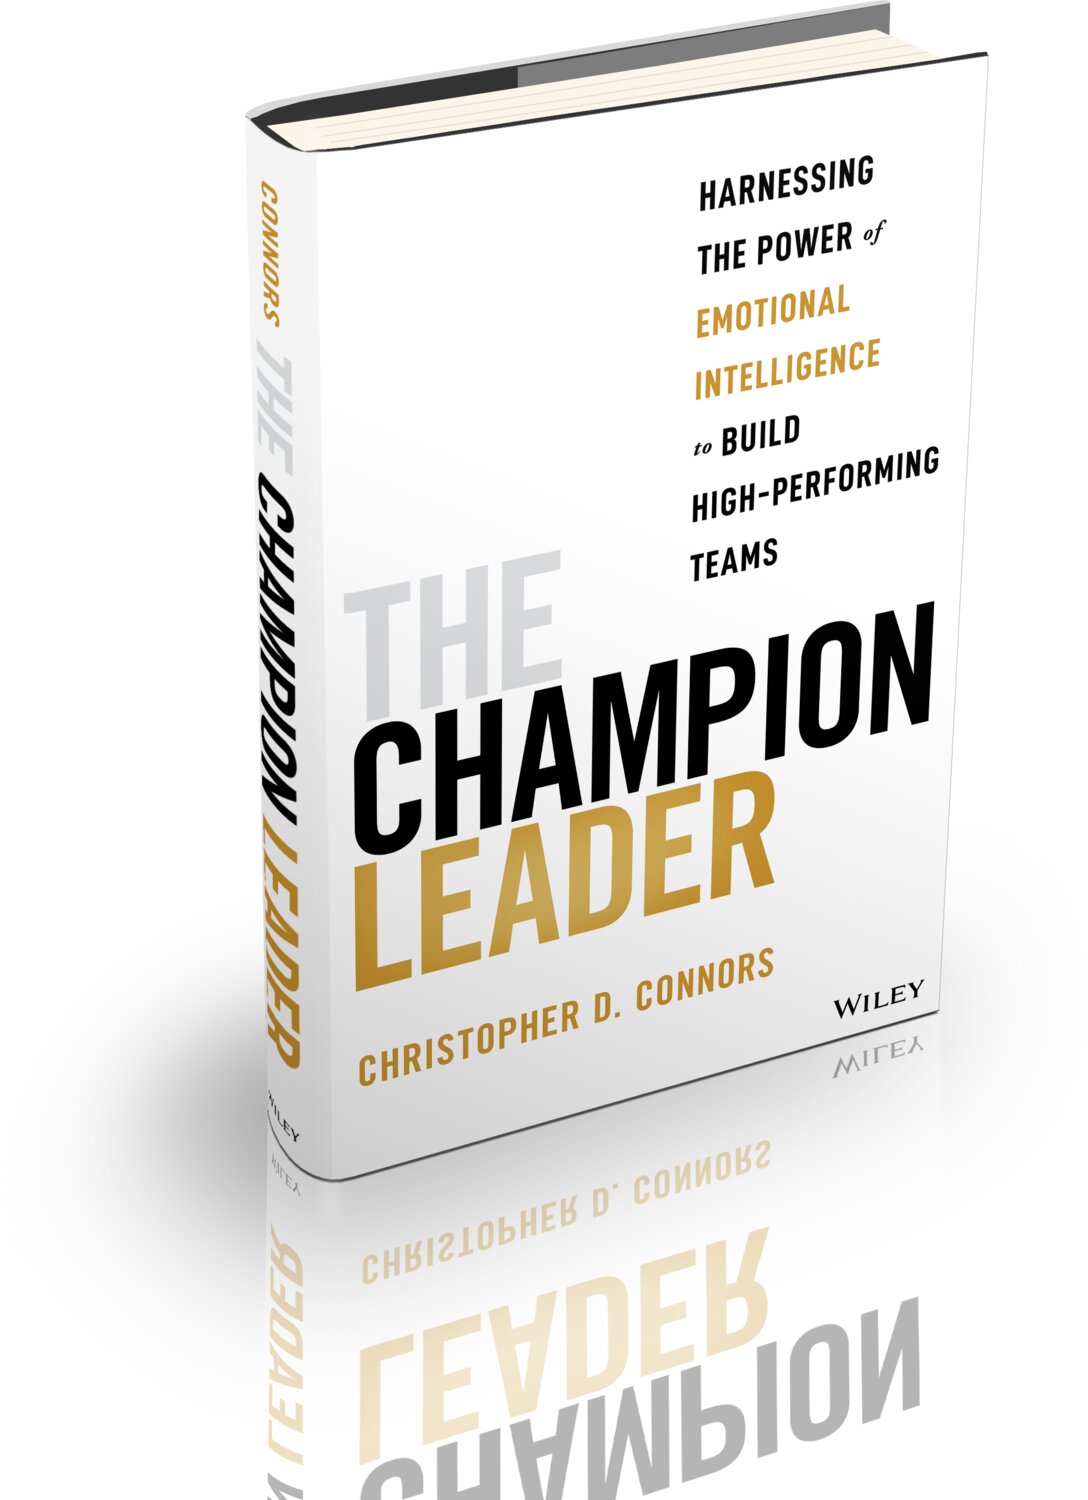 ‘The Champion Leader’ by Christopher D. Connors will be available in stores and via online book retailers on May 7.